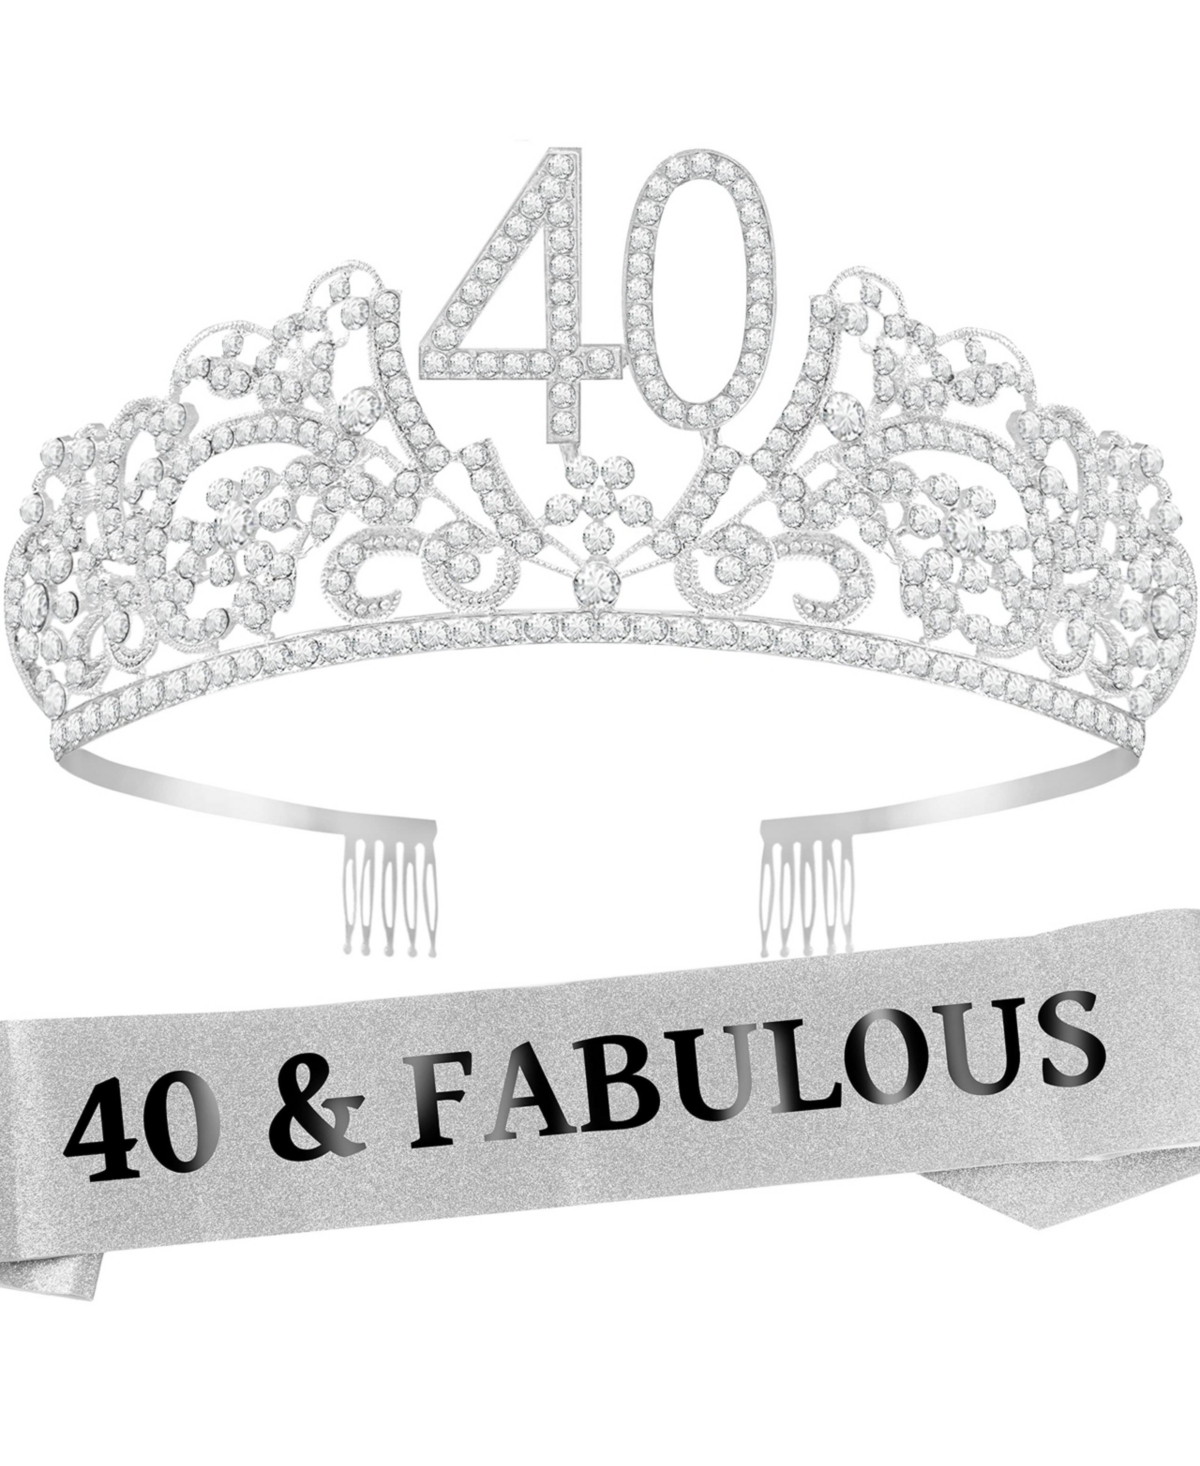 40th Birthday Sash and Tiara Set for Women - Glitter Sash with Flowers and Rhinestone Silver Metal Tiara, Perfect 40th Birthday Party Gifts and Access